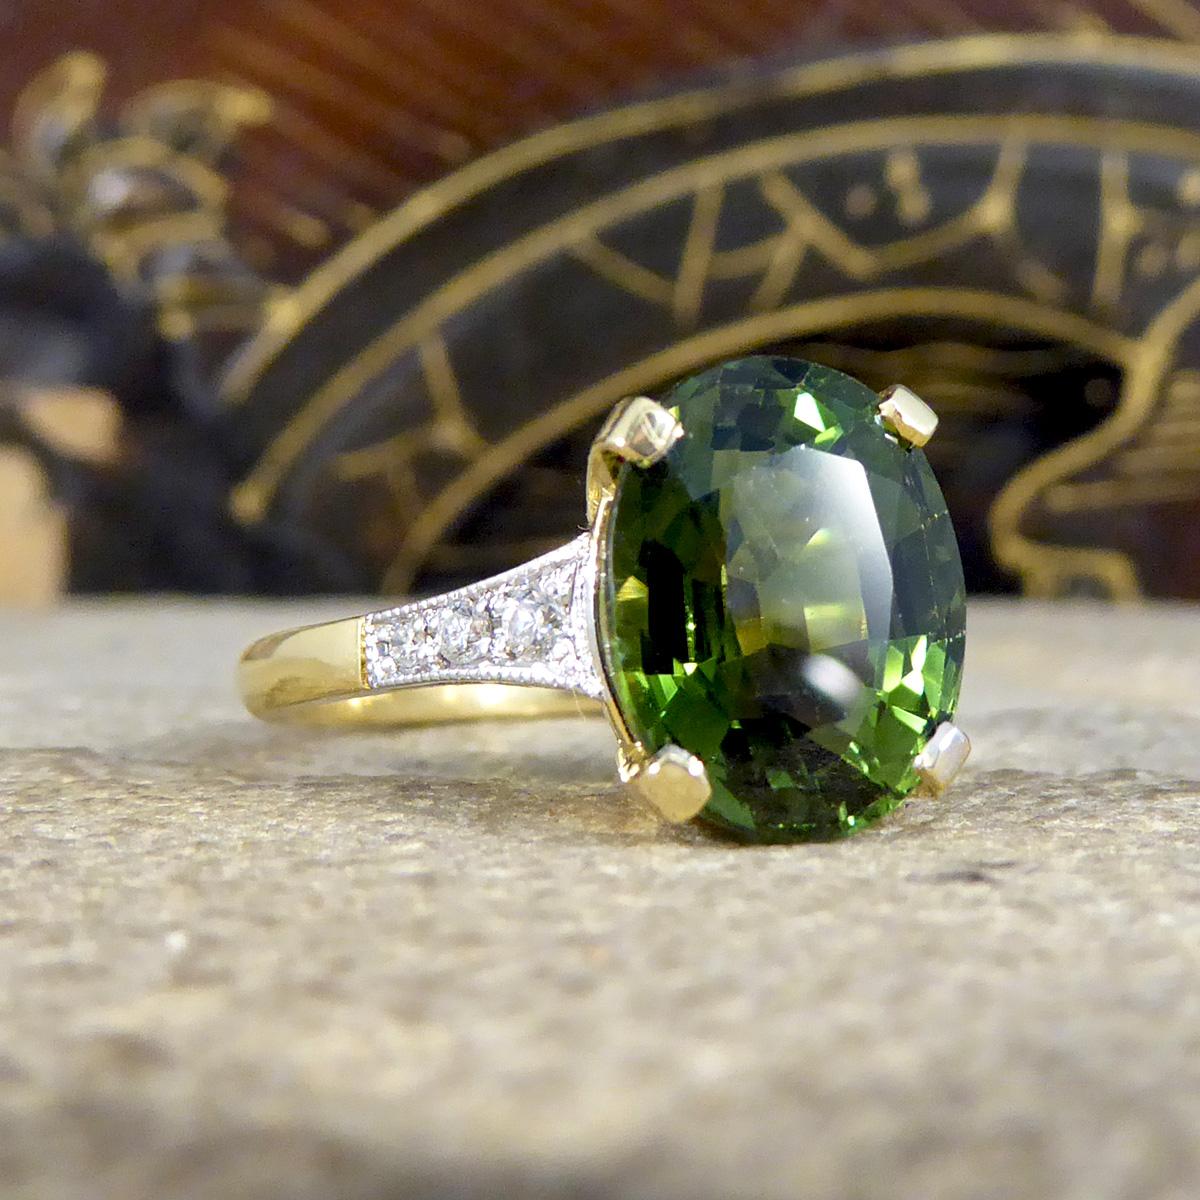 This stunning ring has been hand crafted and is new and never worn. It has been designed and carefully crafted to resemble an Art Deco style ring with a deep and mesmerising Green Tourmaline gemstone in the centre weighing 4.10ct. On either side of